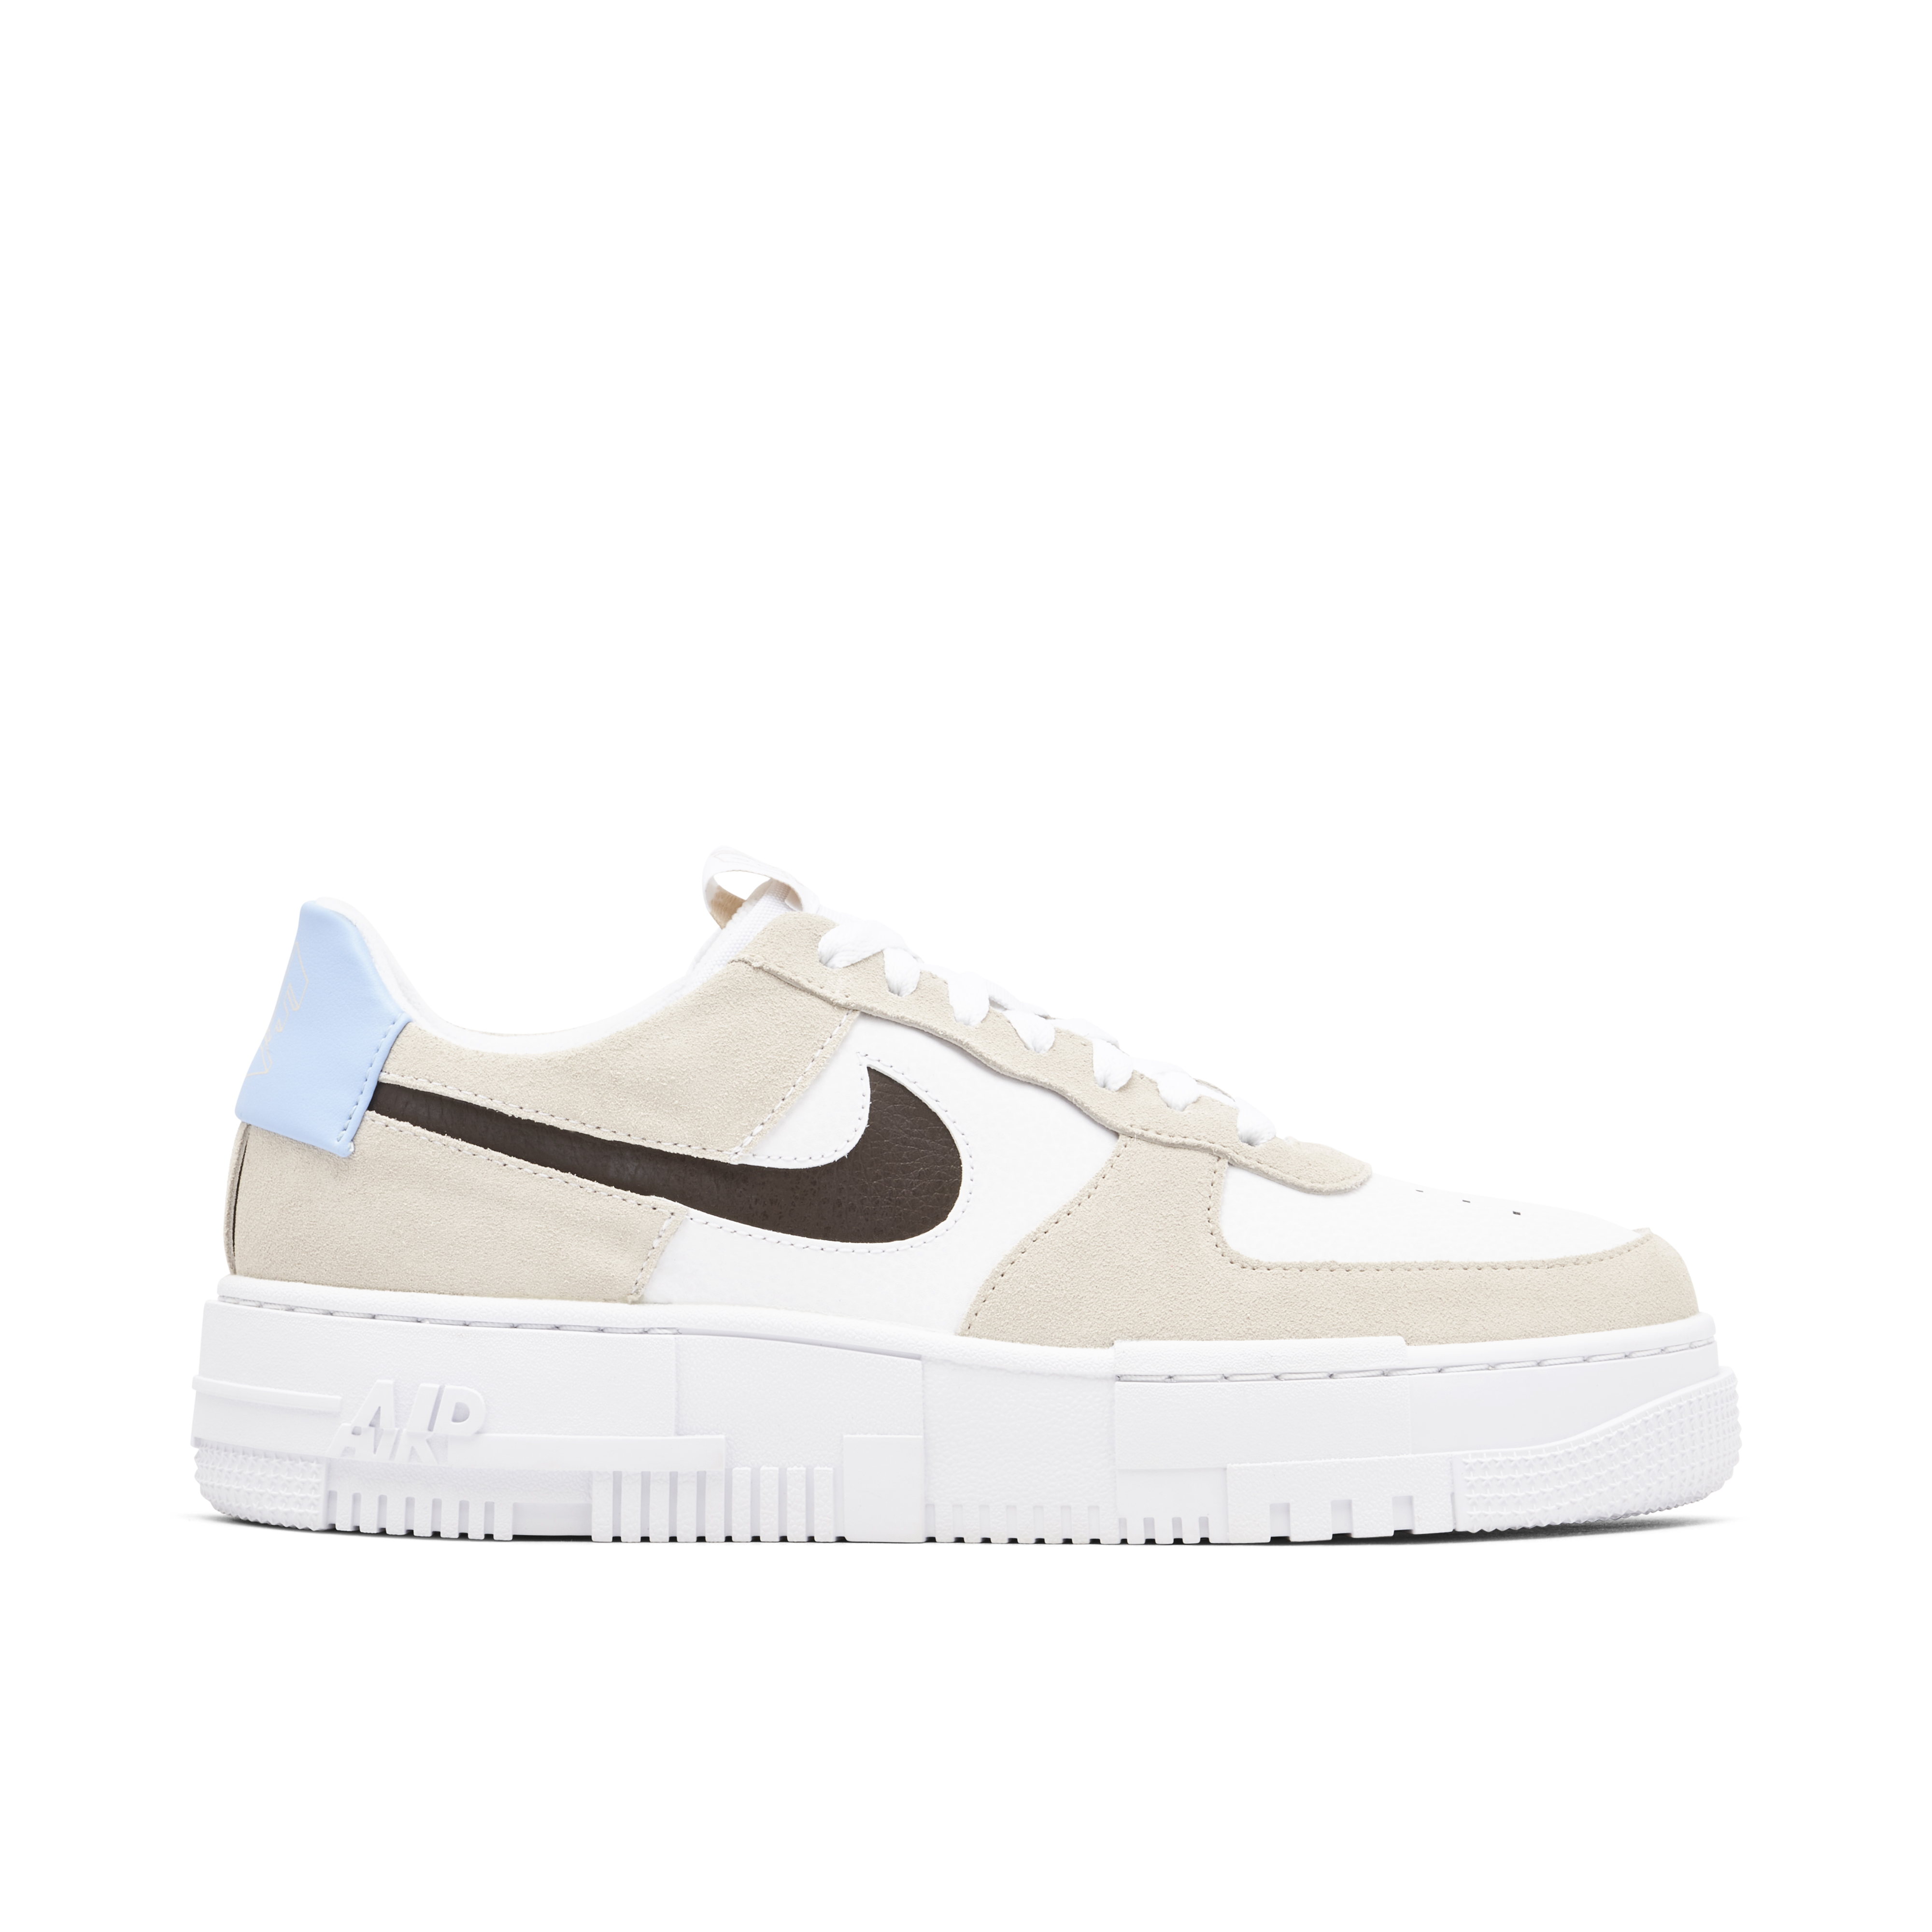 Nike Air Force 1 Low Pixel Desert Sand Femme | DH3861-001 | Laced